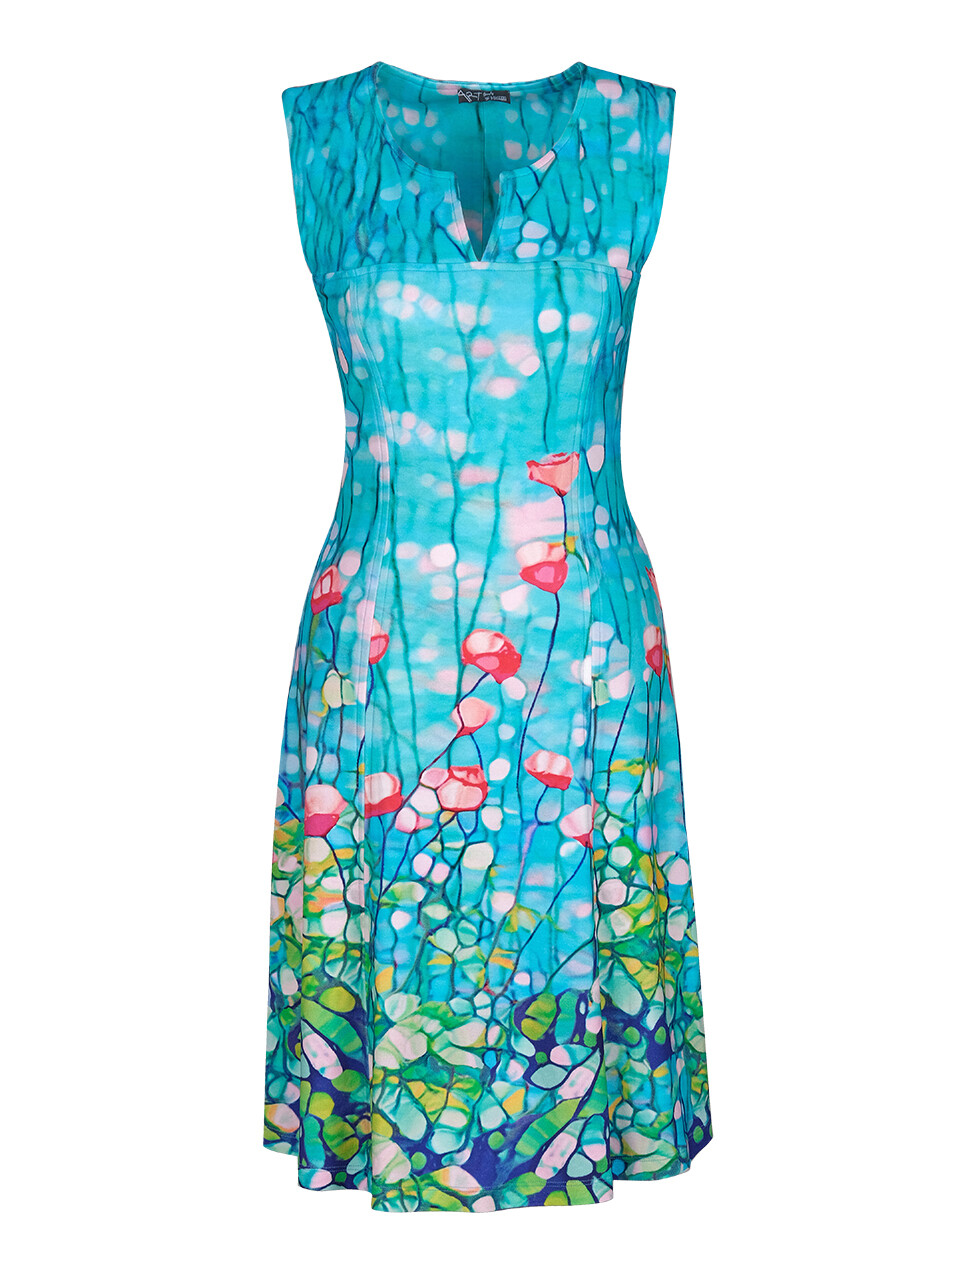 Simply Art Dolcezza: The Poppies Flared Art Sundress SOLD OUT